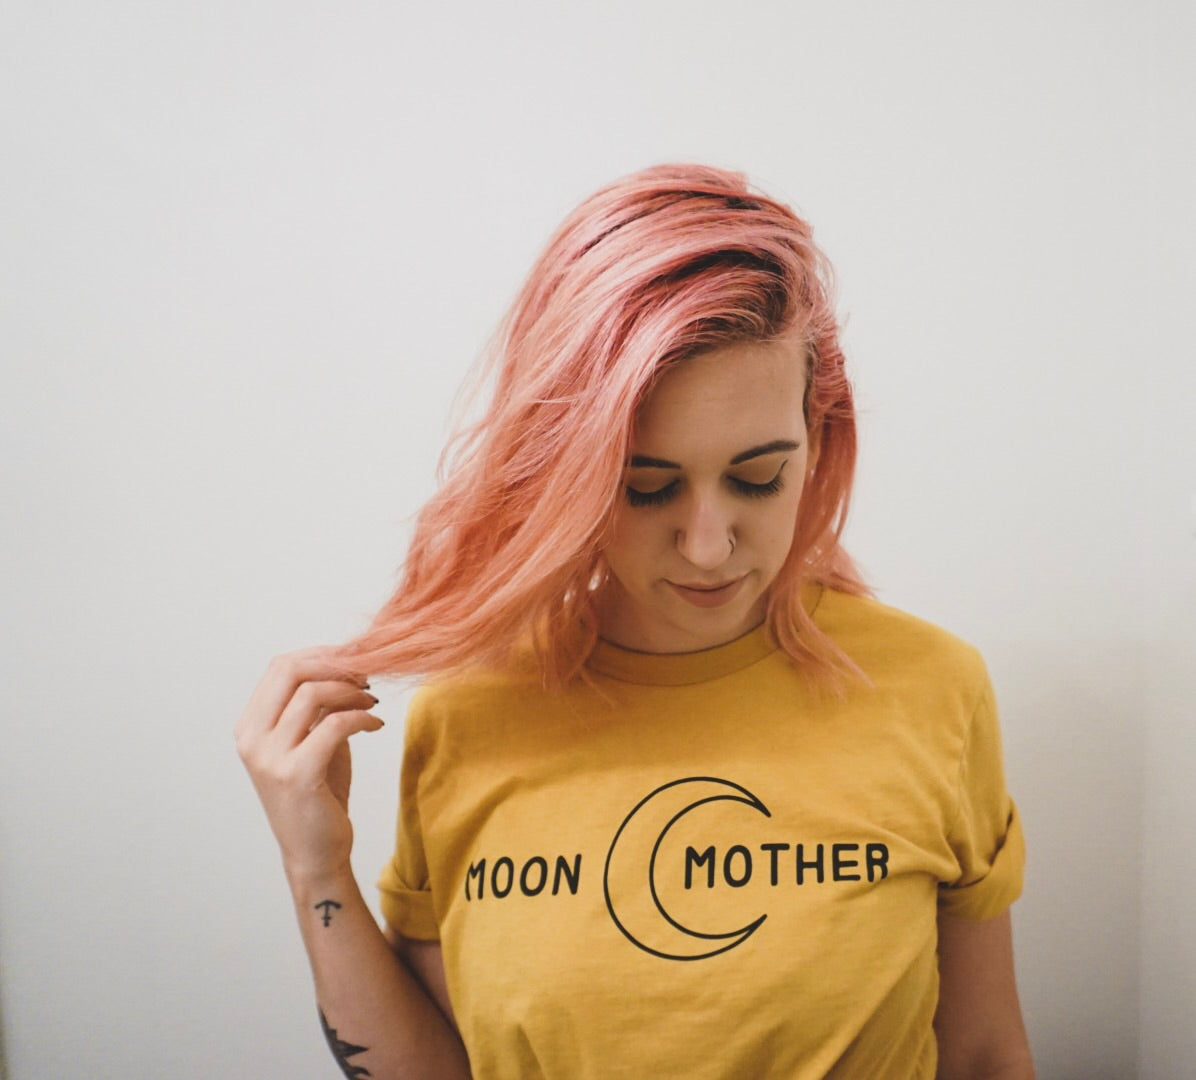 Moon Mother - Unisex tee with moon graphic 